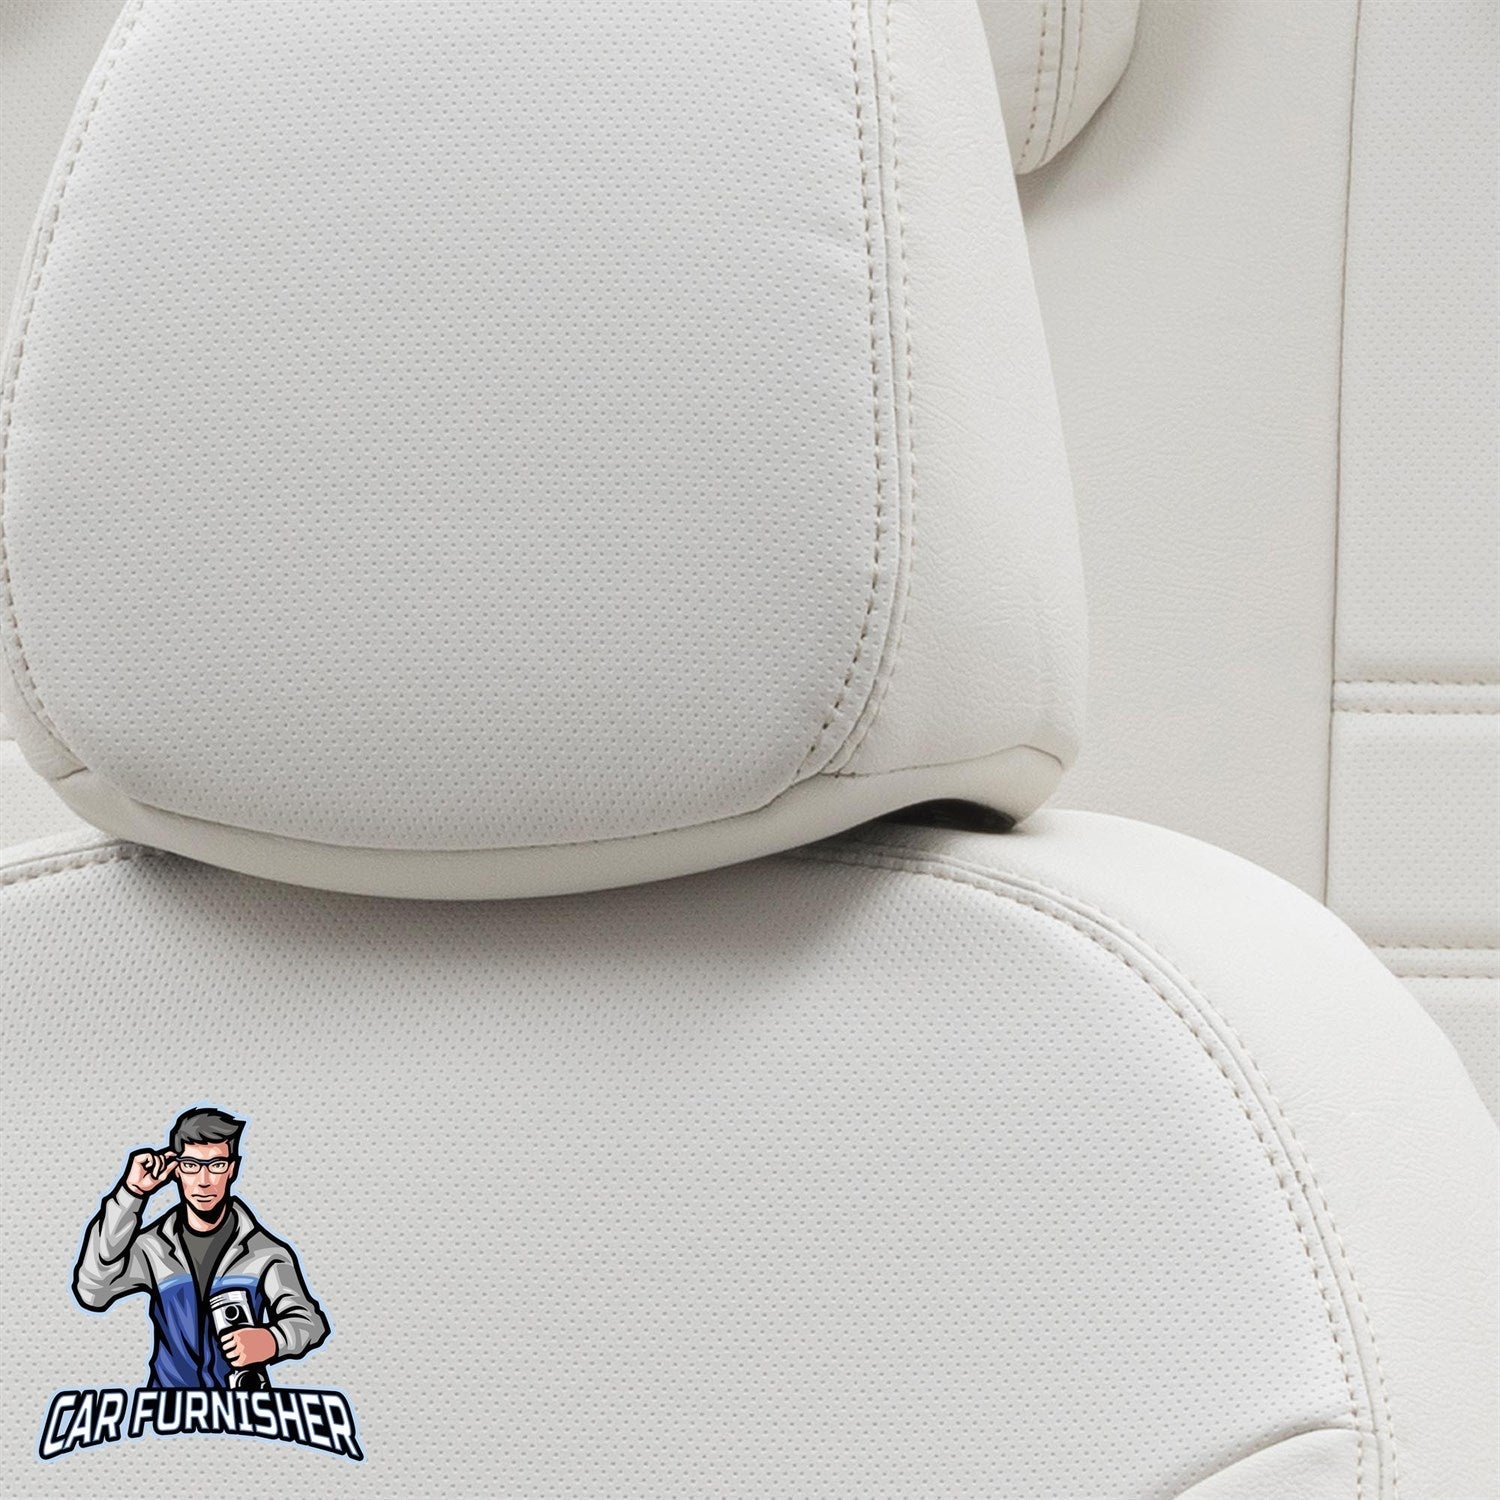 Peugeot 508 Seat Covers Istanbul Leather Design Ivory Leather